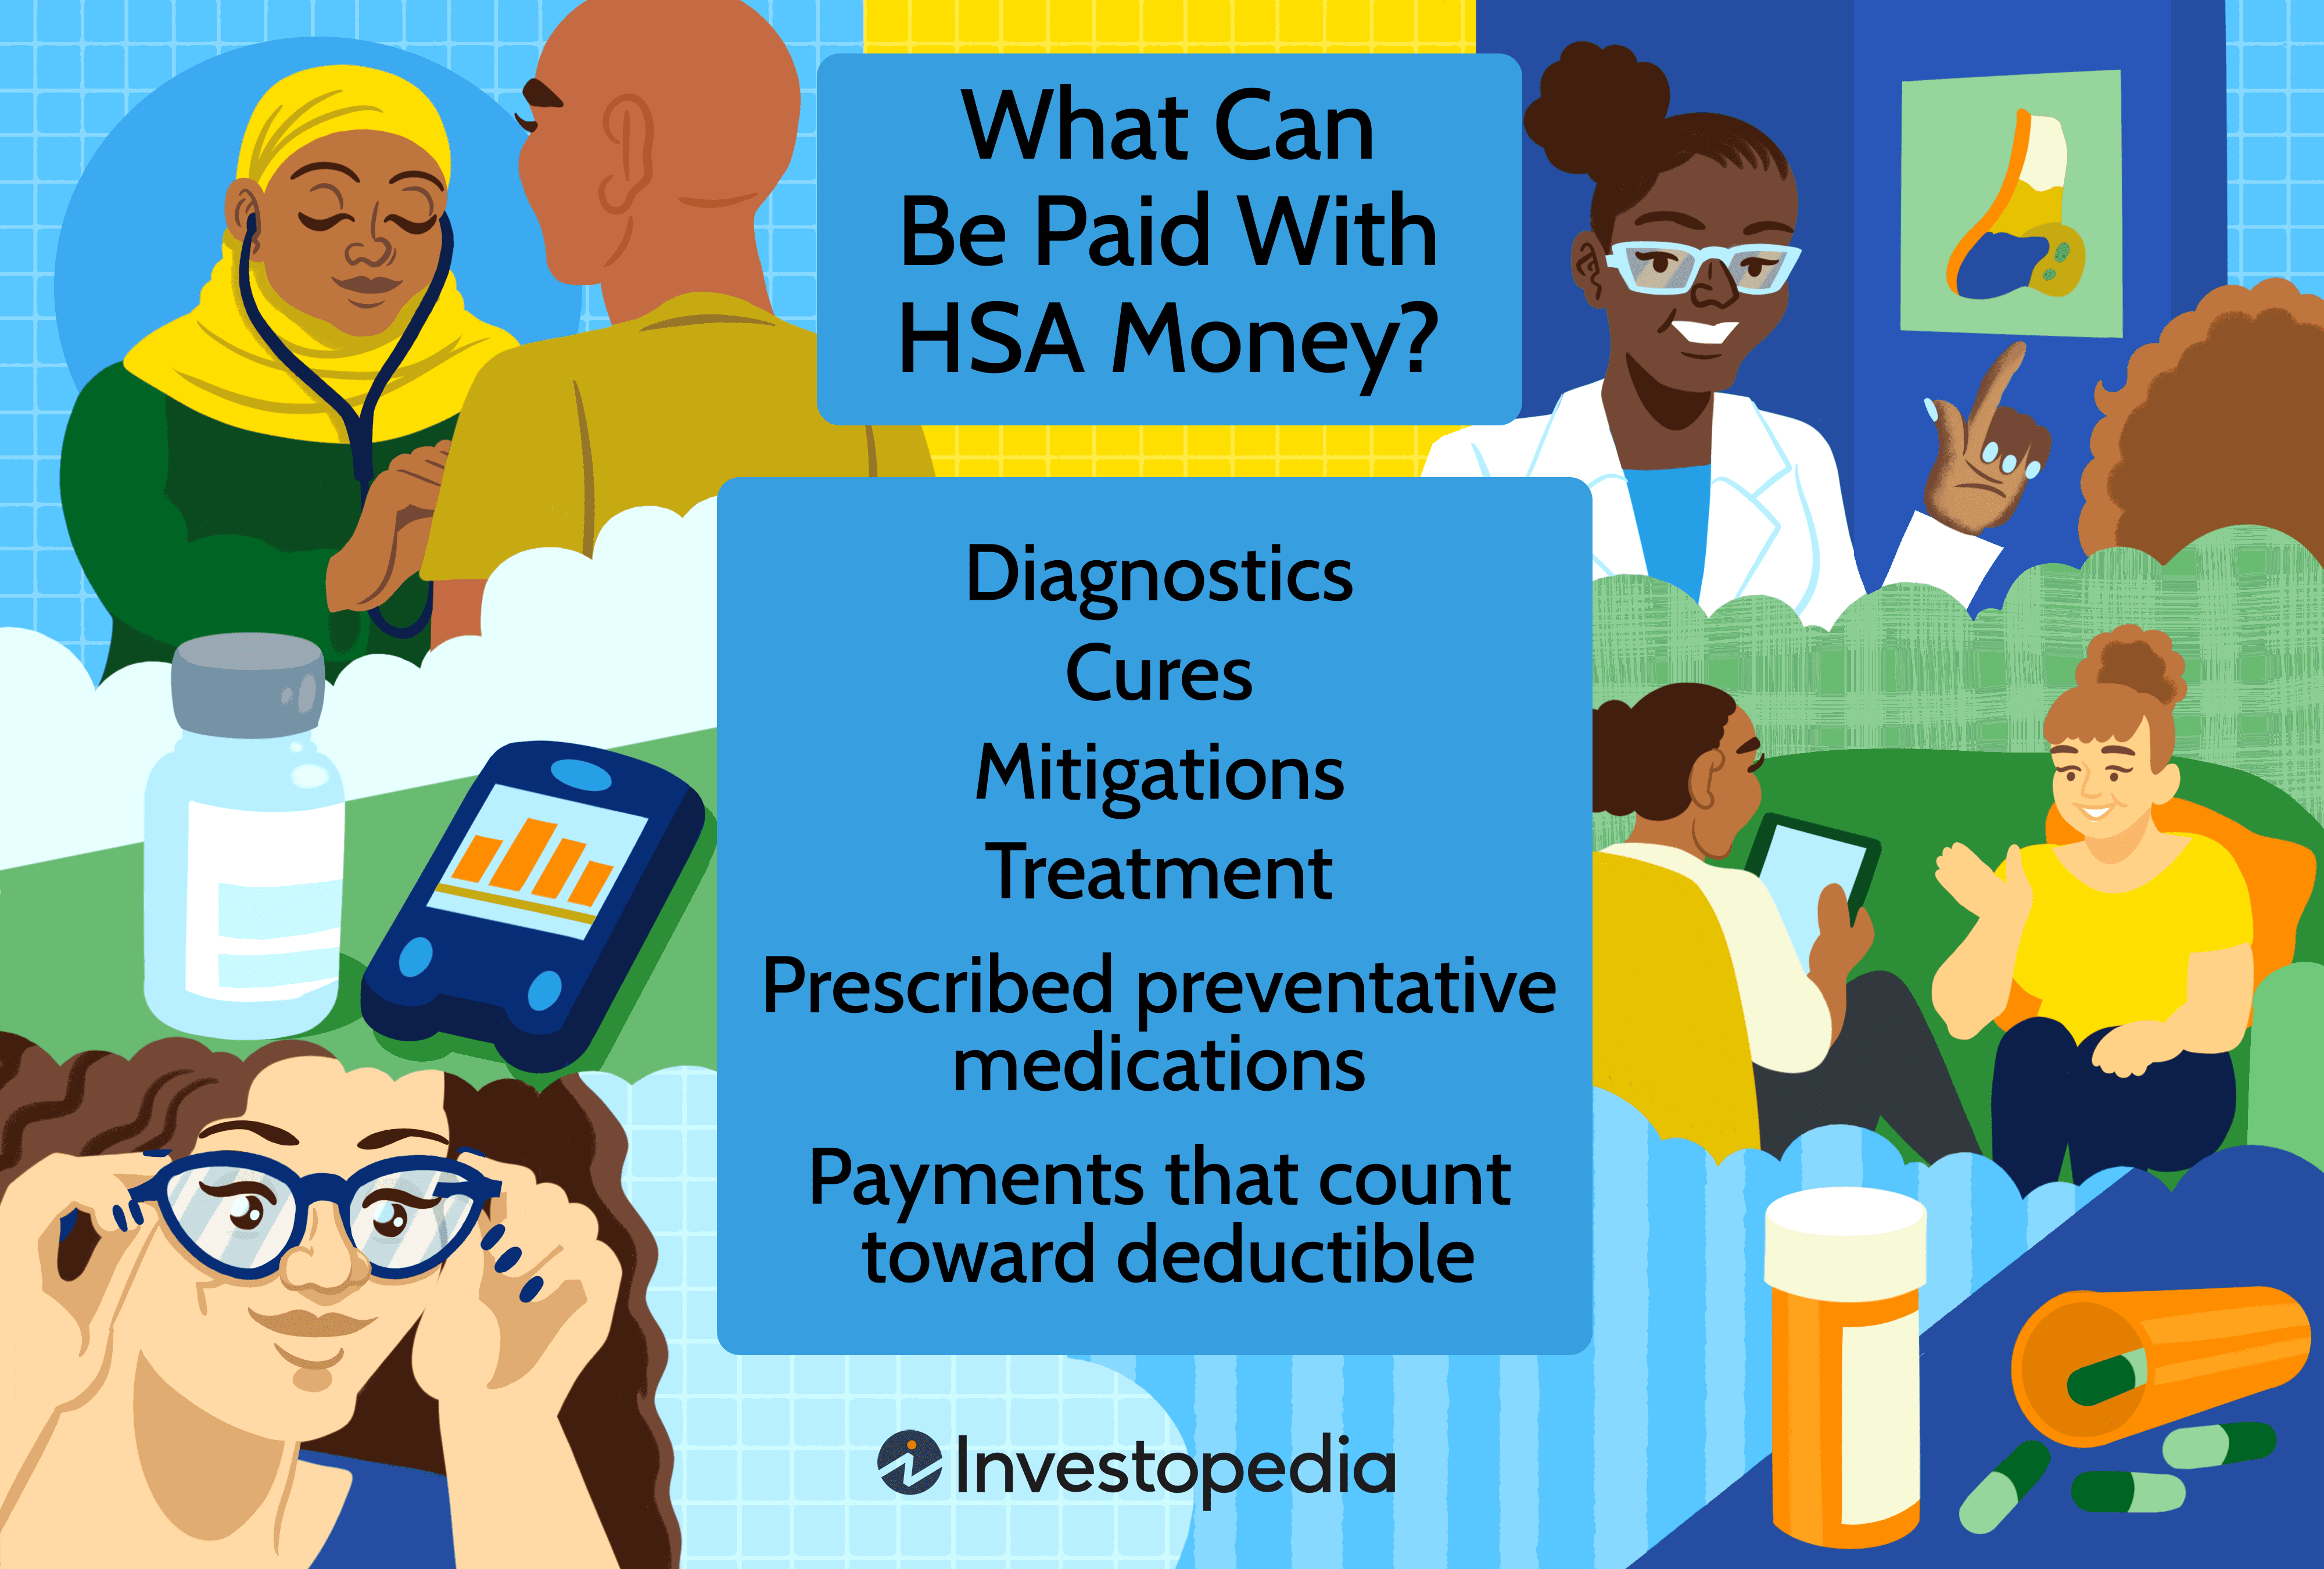 What Can Be Paid With HSA Money?